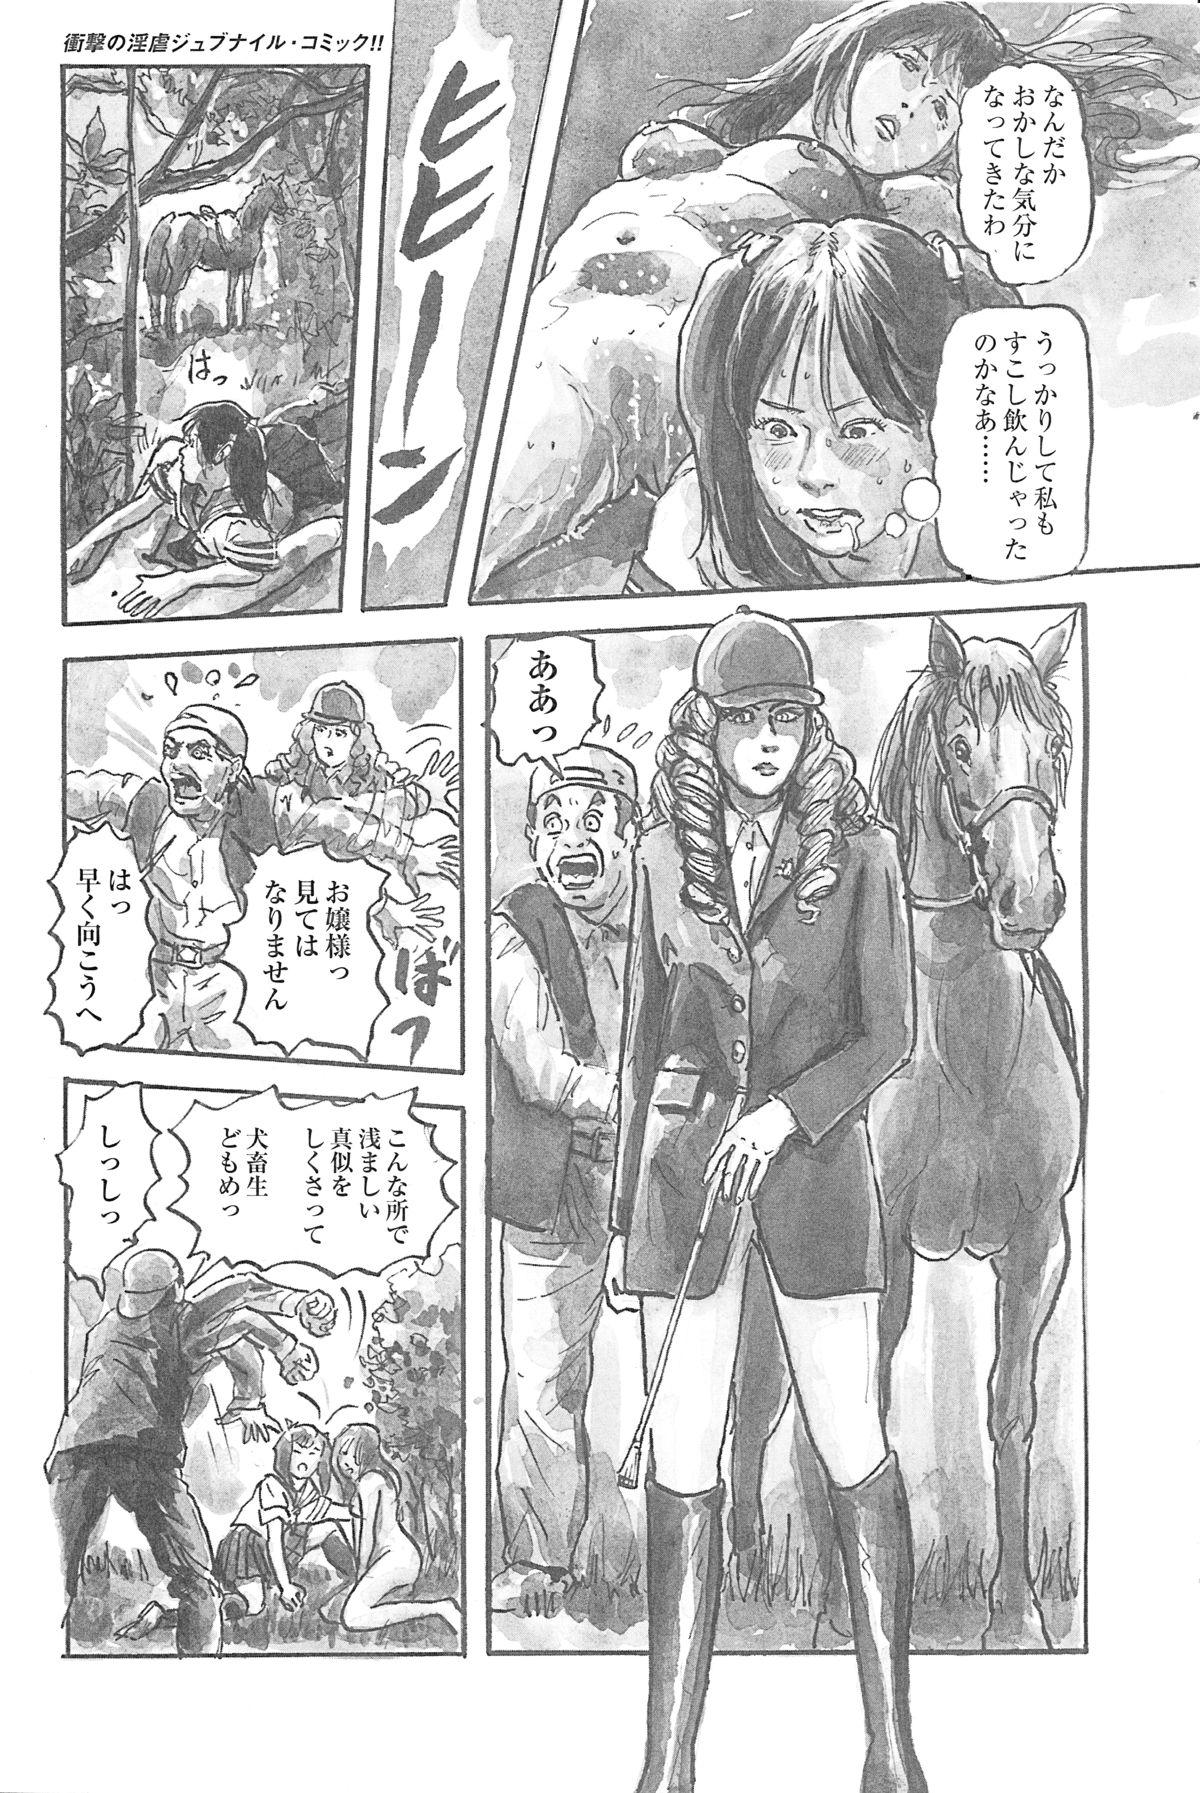 Audition Girl Detective Team part 4 「Dream Girl」 1080p - Page 3